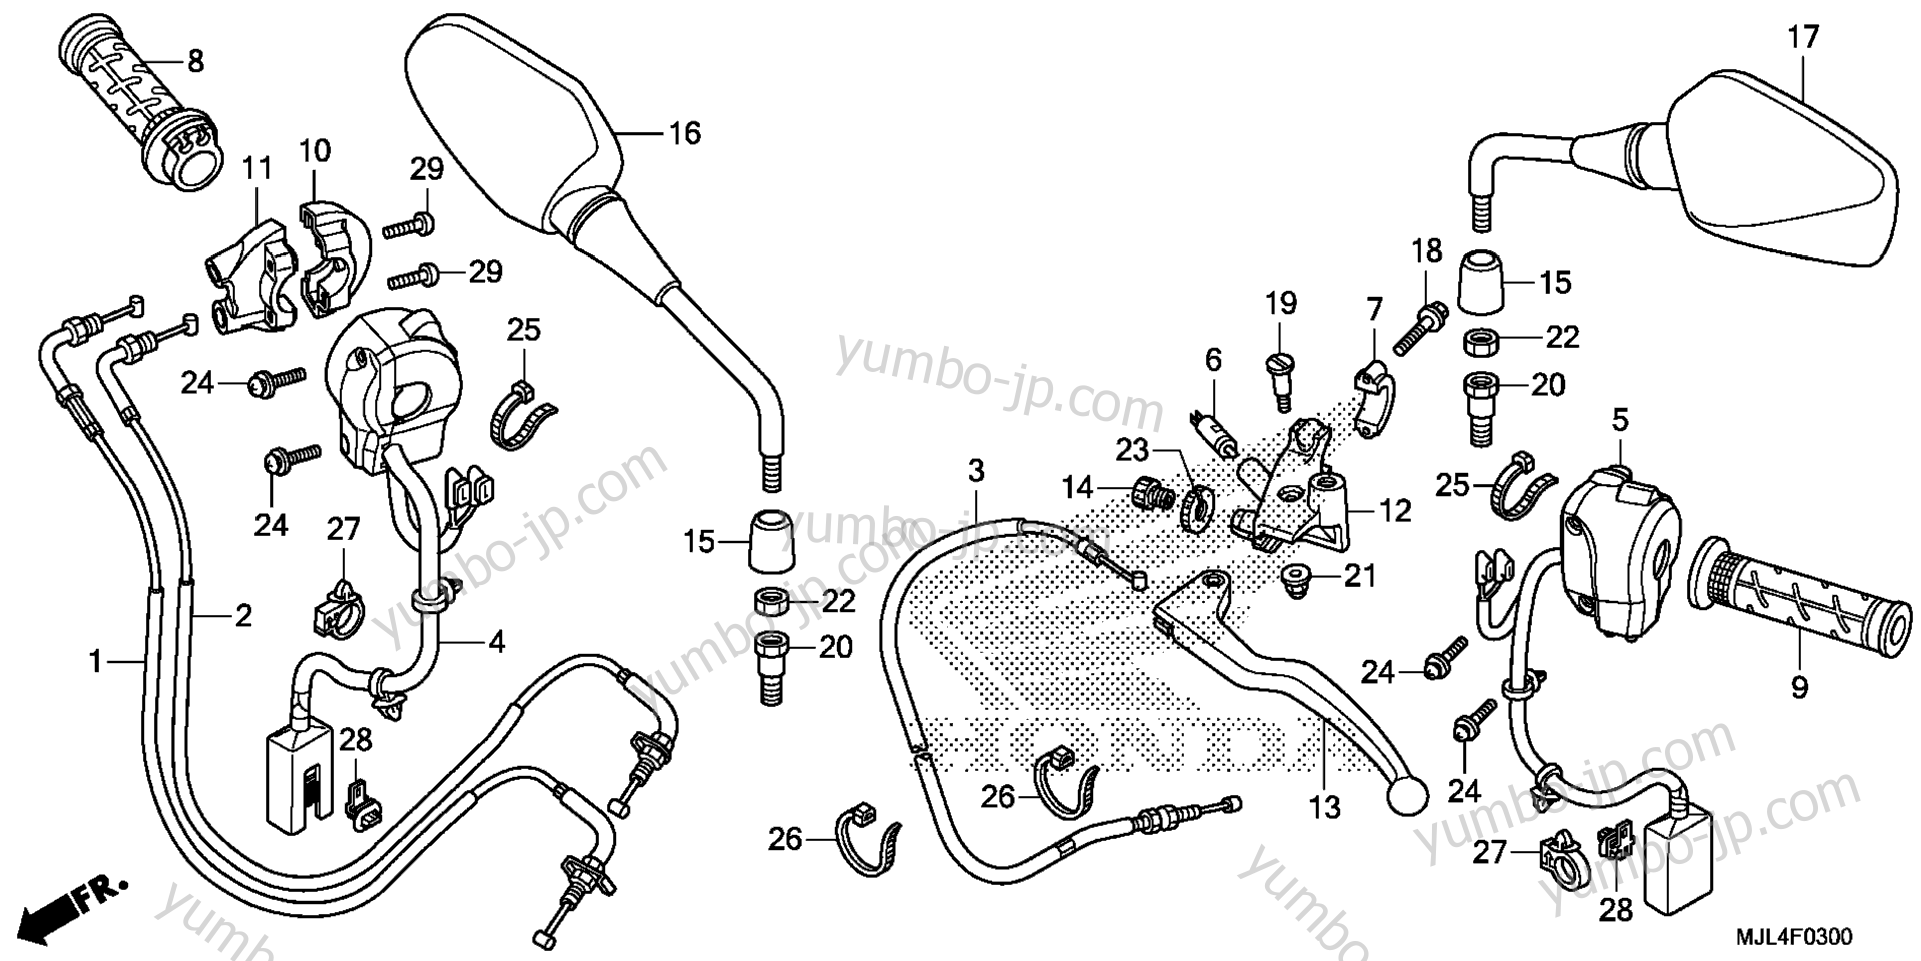 HANDLE LEVER / SWITCH / CABLE (NC700X/NC750XA) for motorcycles HONDA NC700X A 2014 year